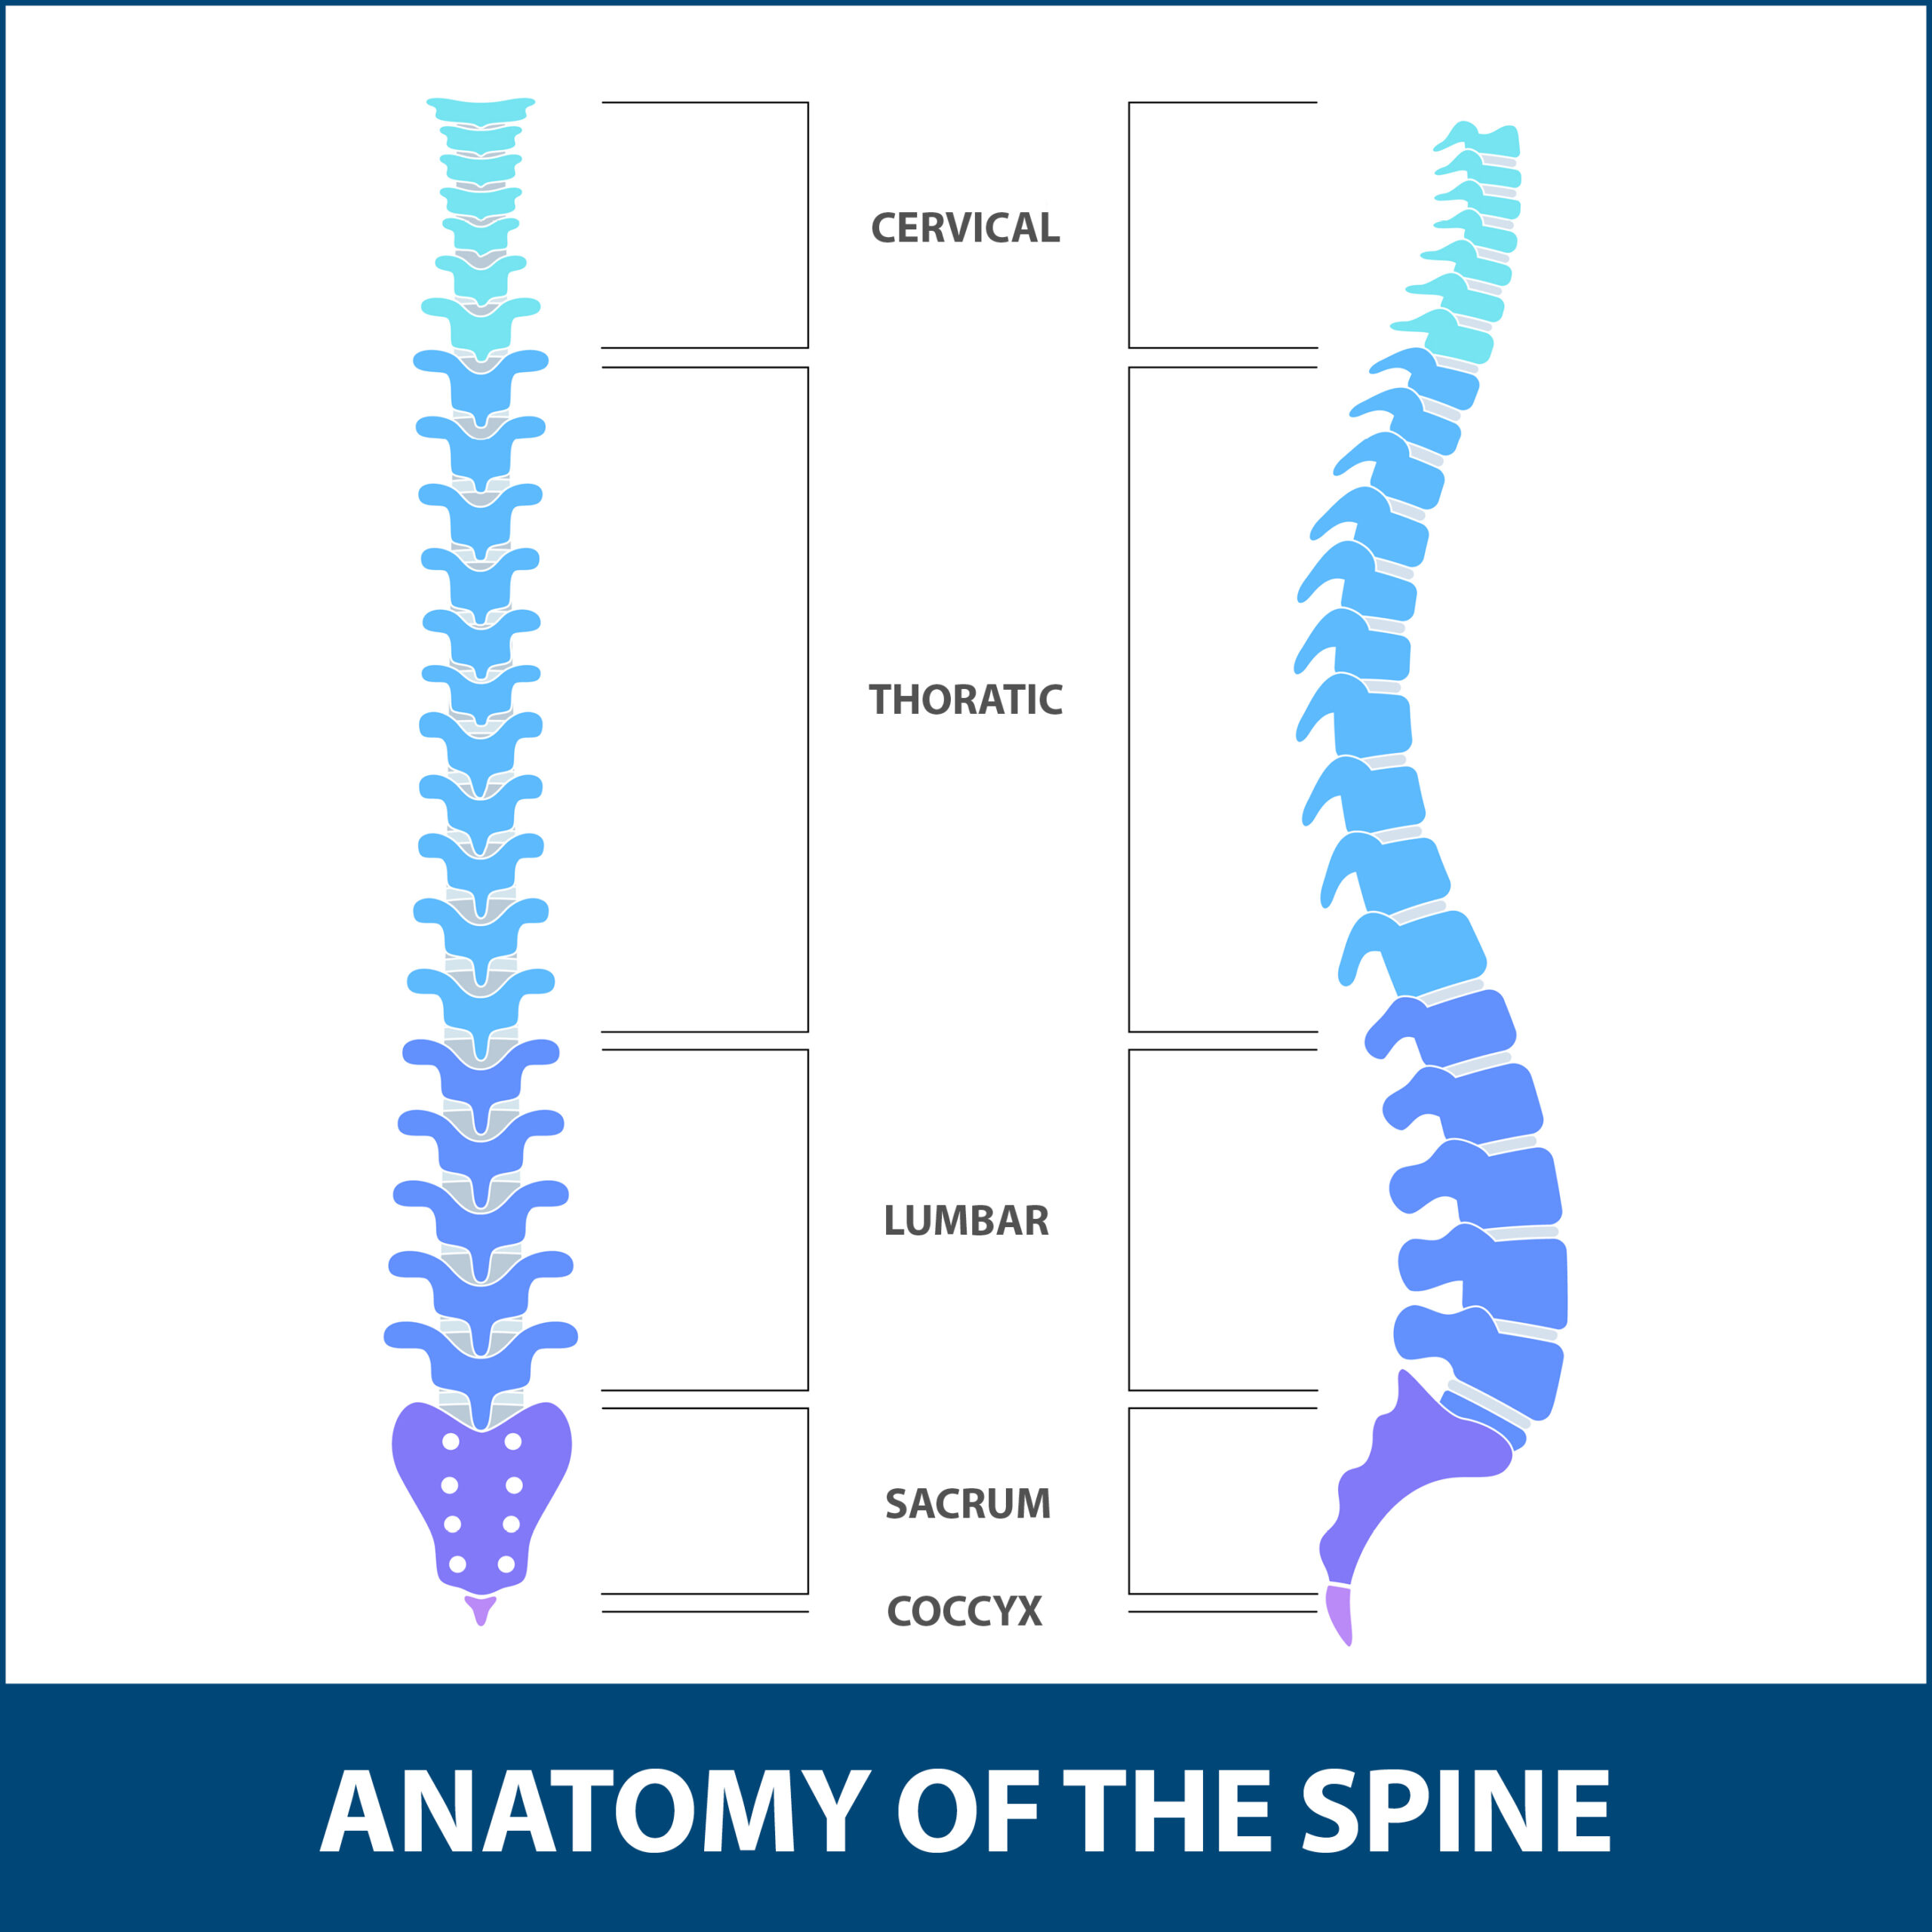 spine illustration to show where vertebroplasty - bone cement injection - can be performed